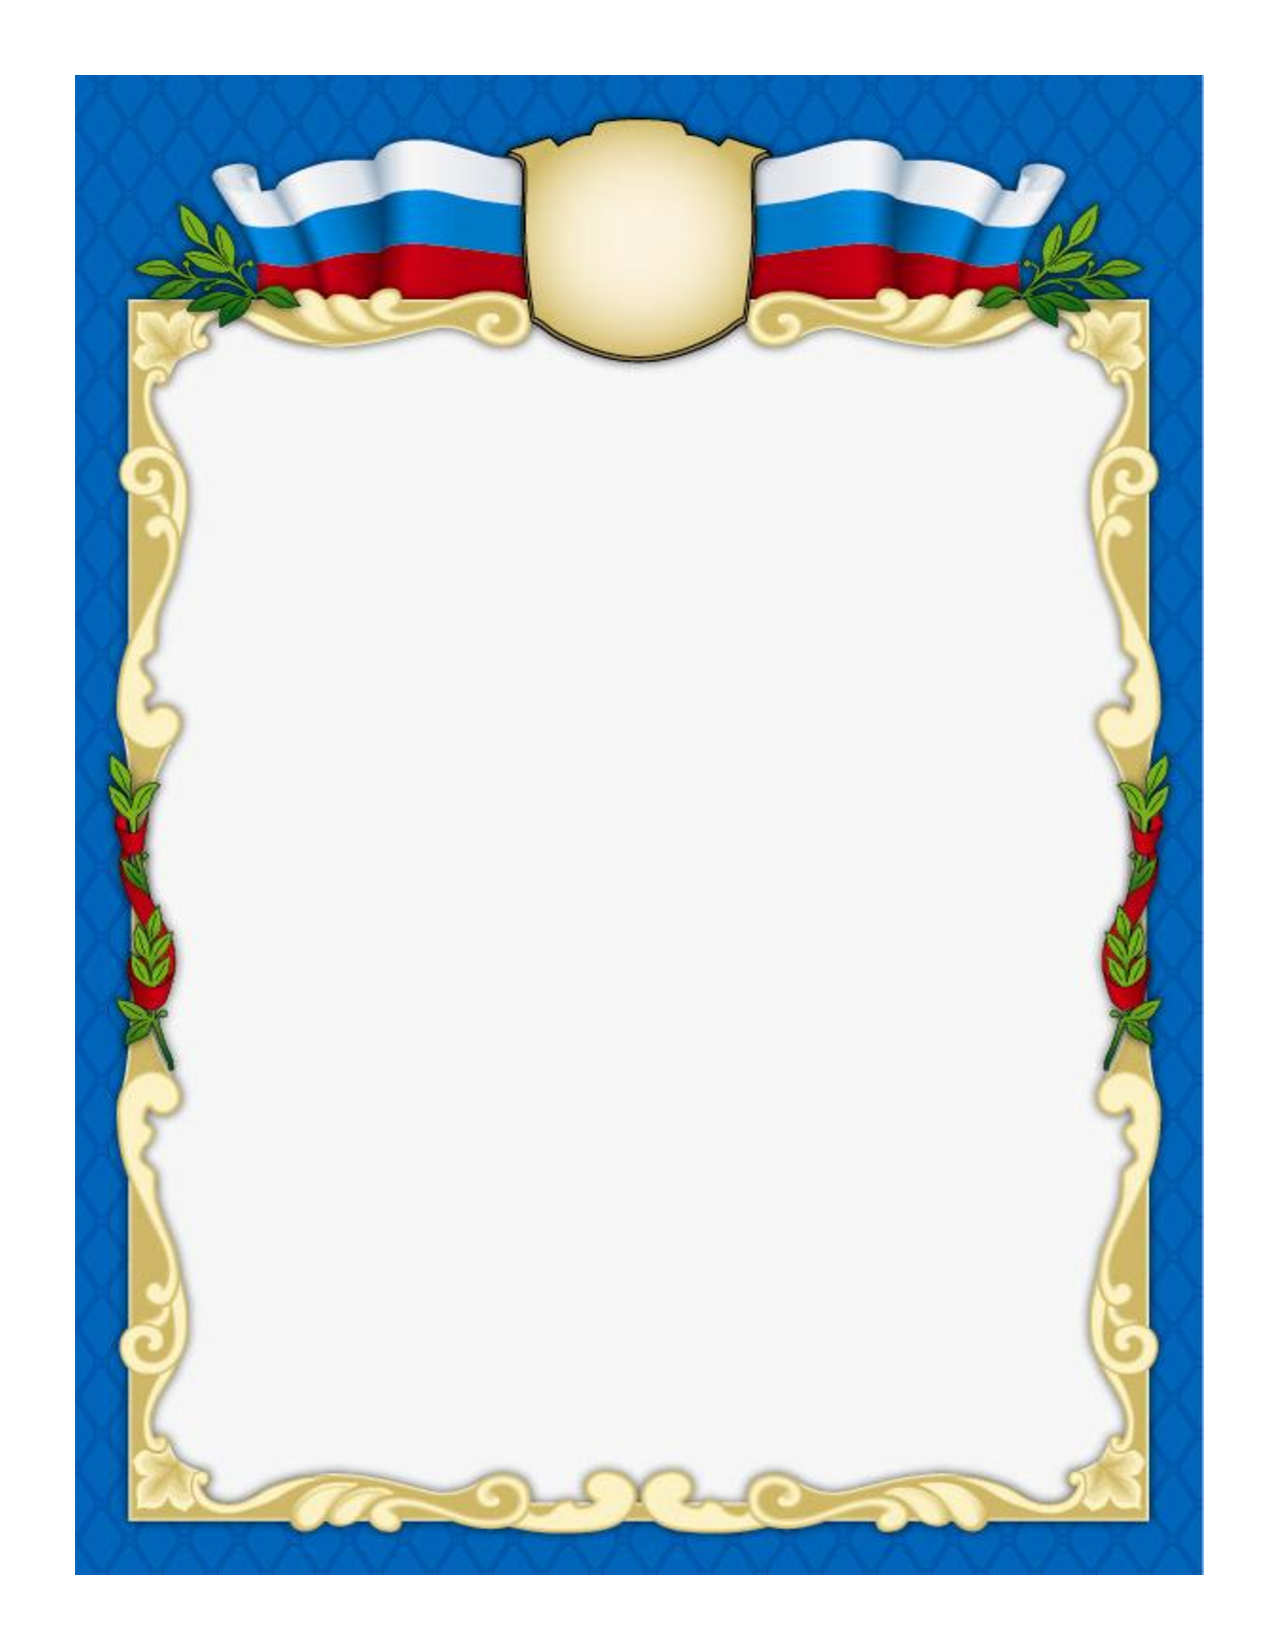 certificate-borders-templates-free-drawing-free-image-download